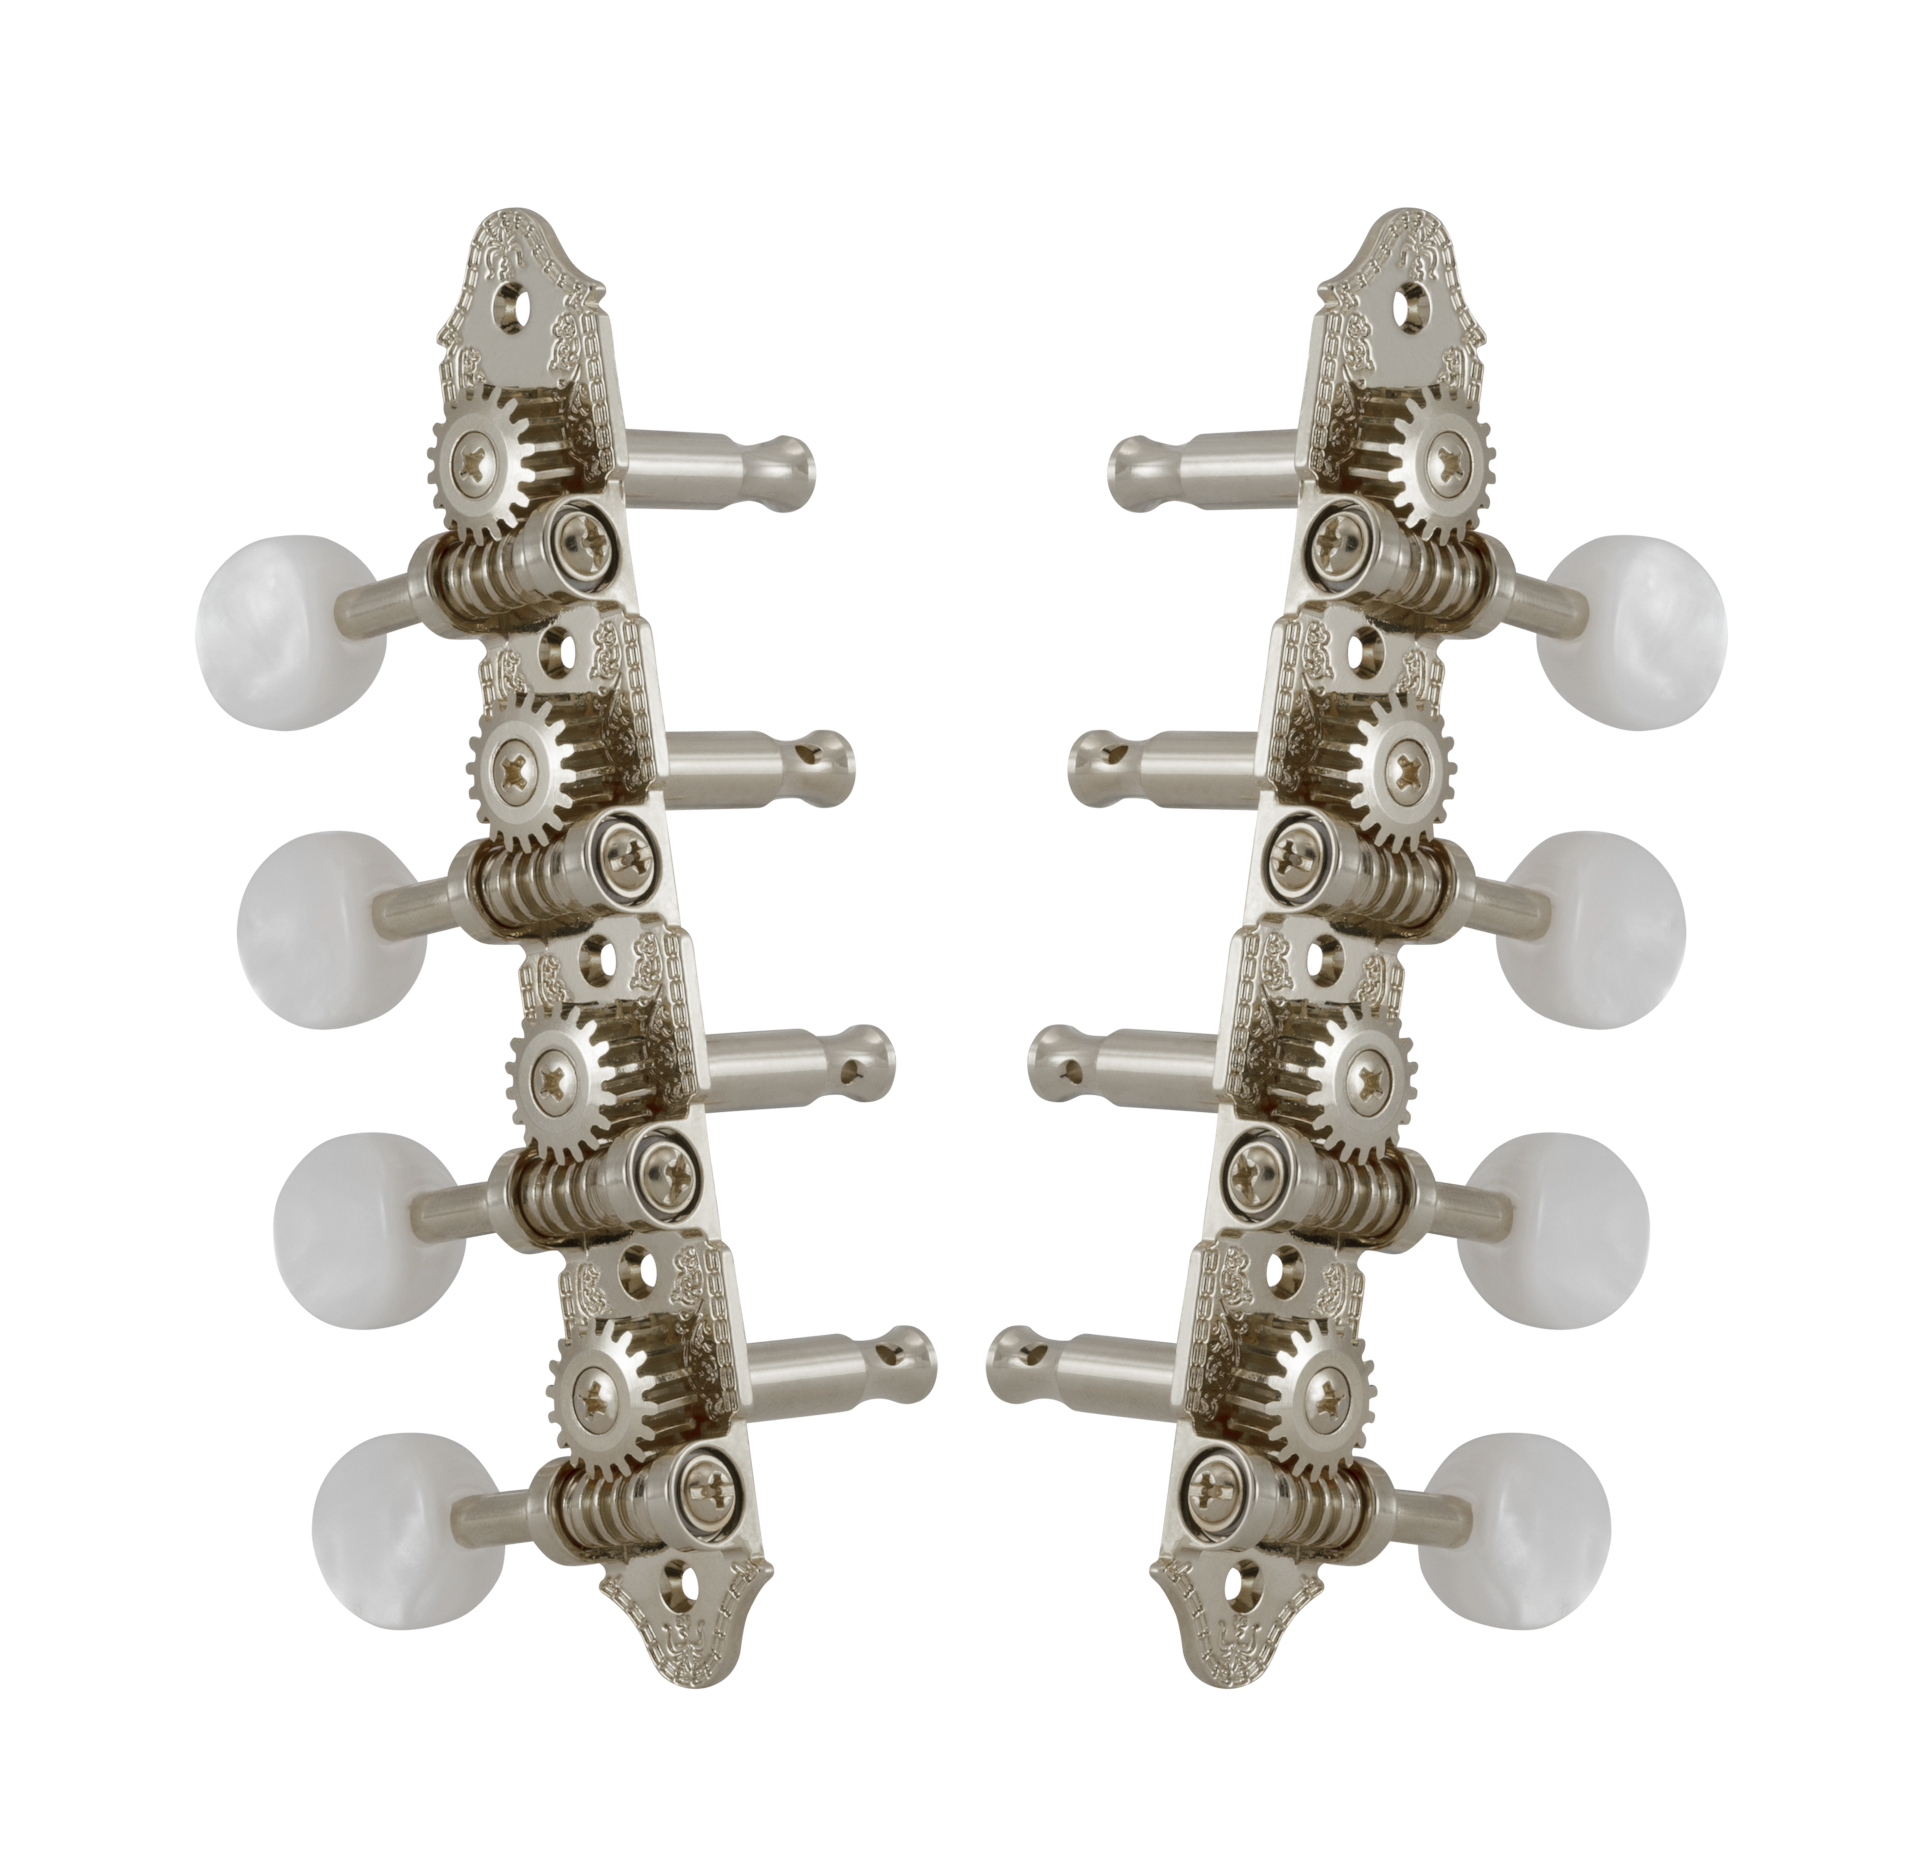 Grover 409VN Professional Mandolin Machines with Pearloid Button - Mandolin Machine Heads, Standard 4 + 4, for "A"-Style Mandolins - Nickel